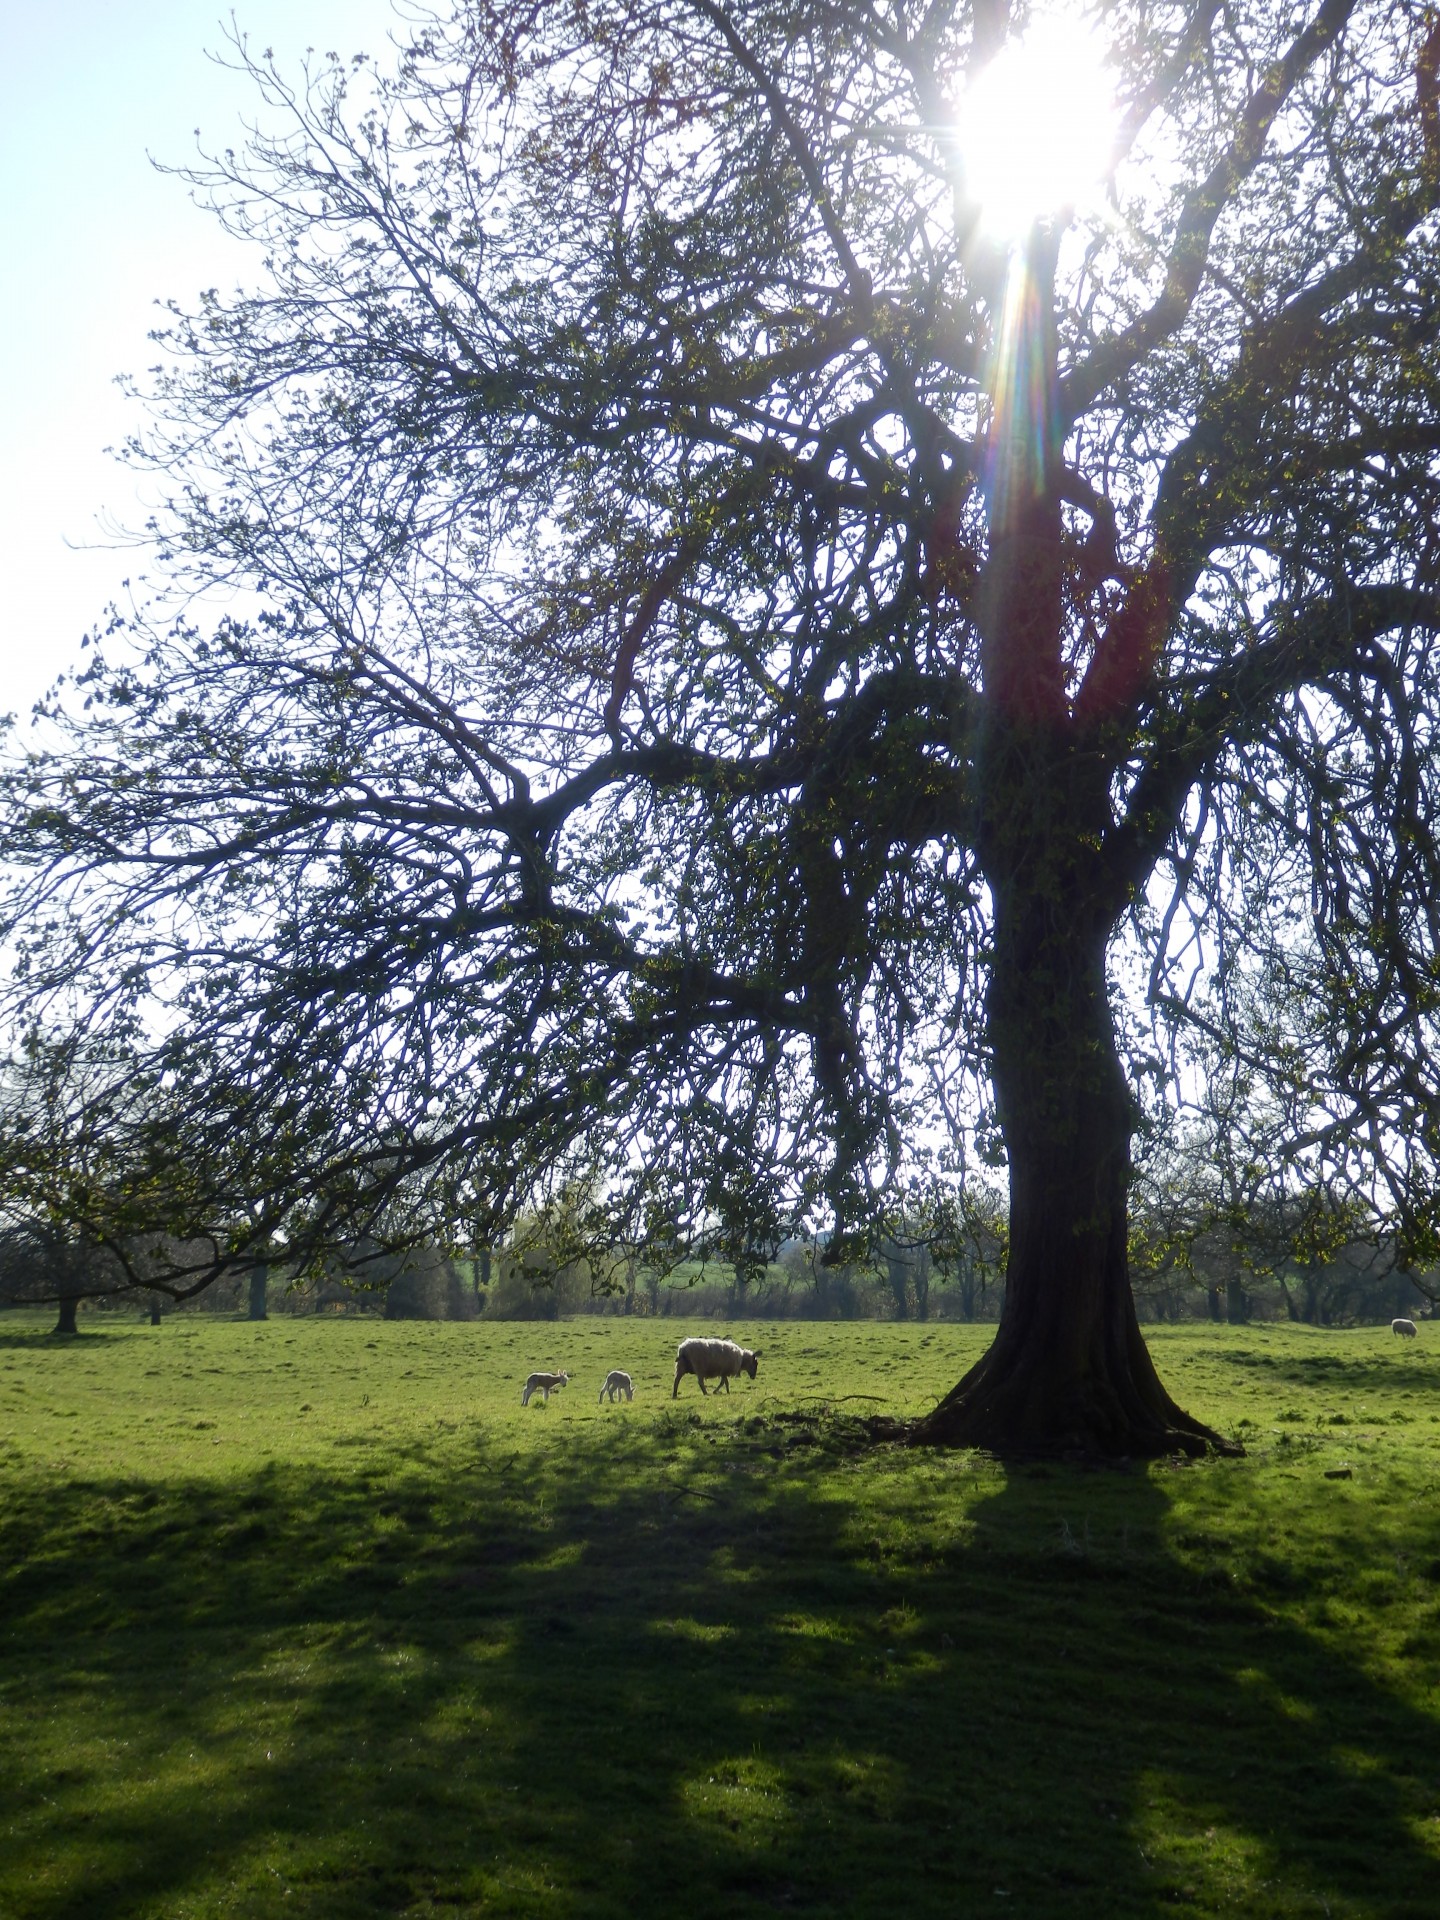 Sun shining through the tree top with sheep and lambs below